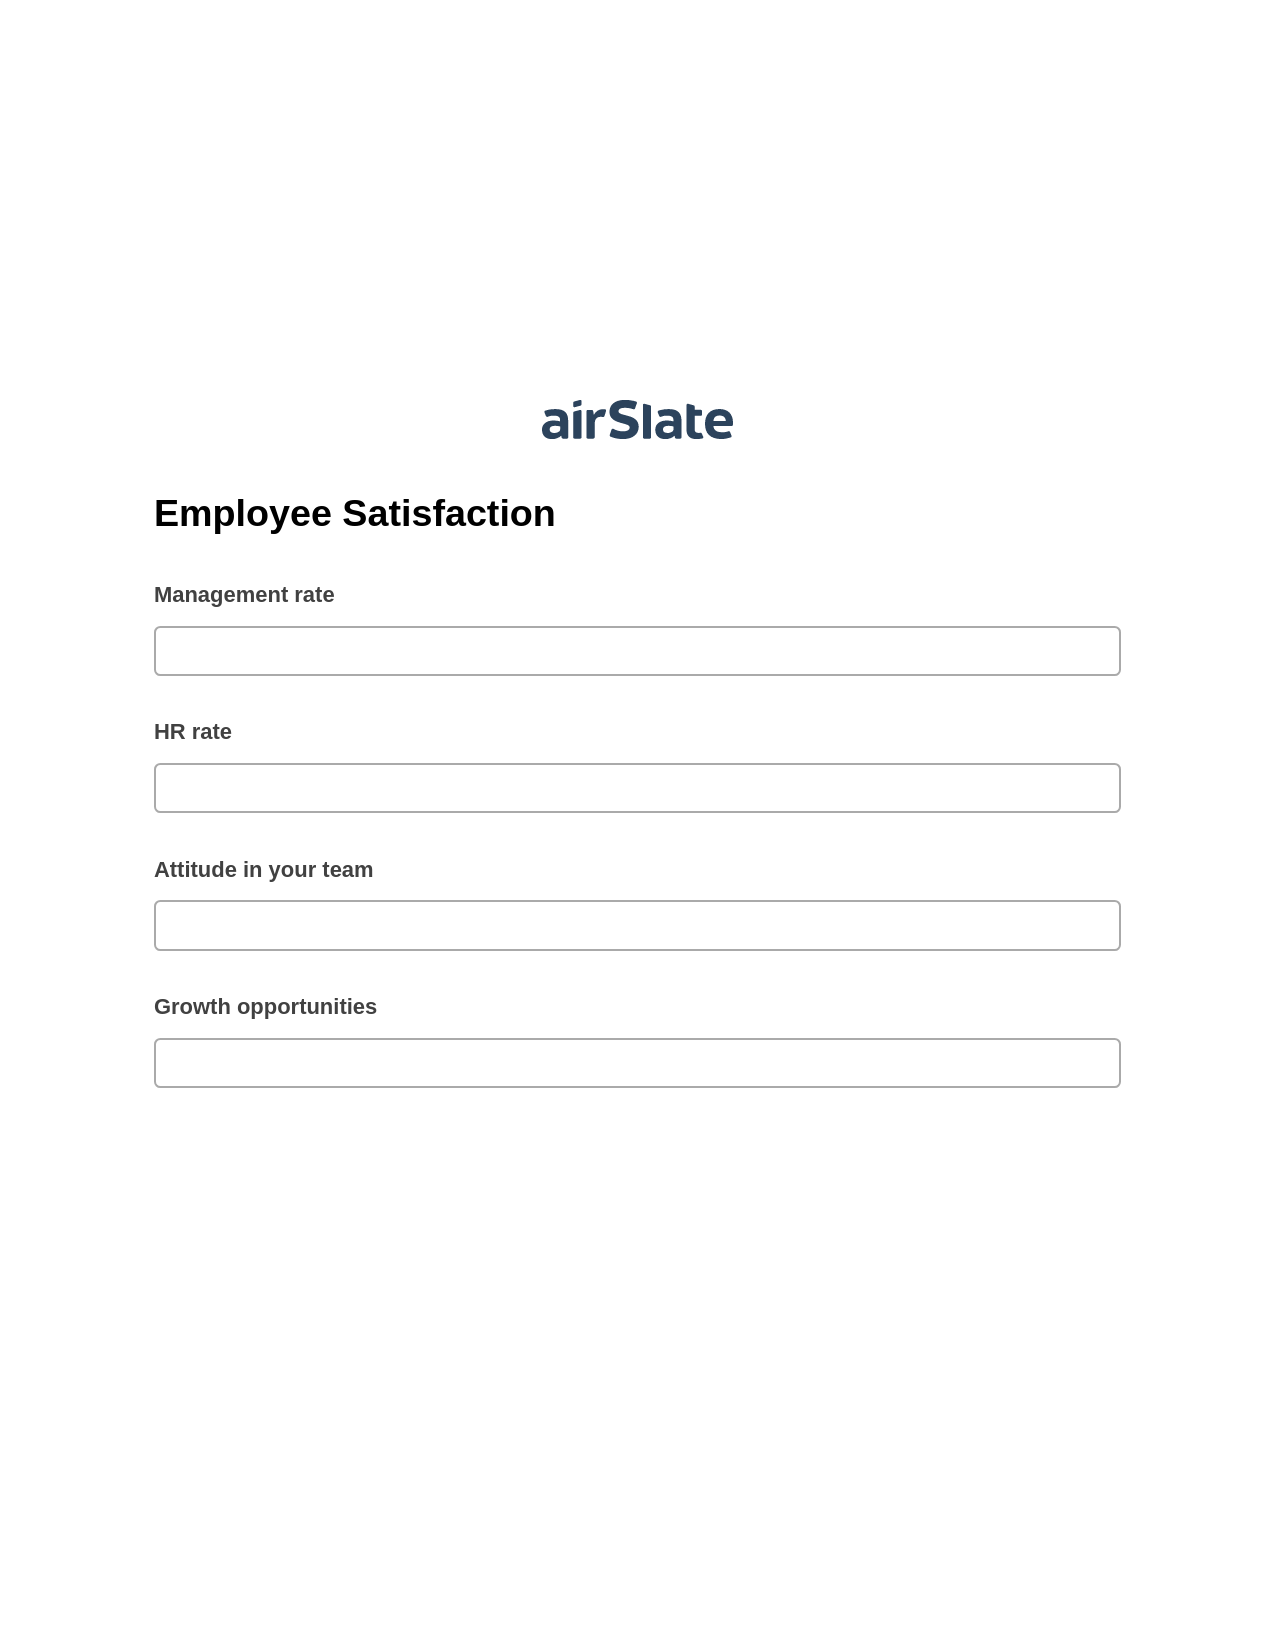 Employee Satisfaction Pre-fill from Excel Spreadsheet Bot, Create Slate Reminder Bot, Post-finish Document Bot